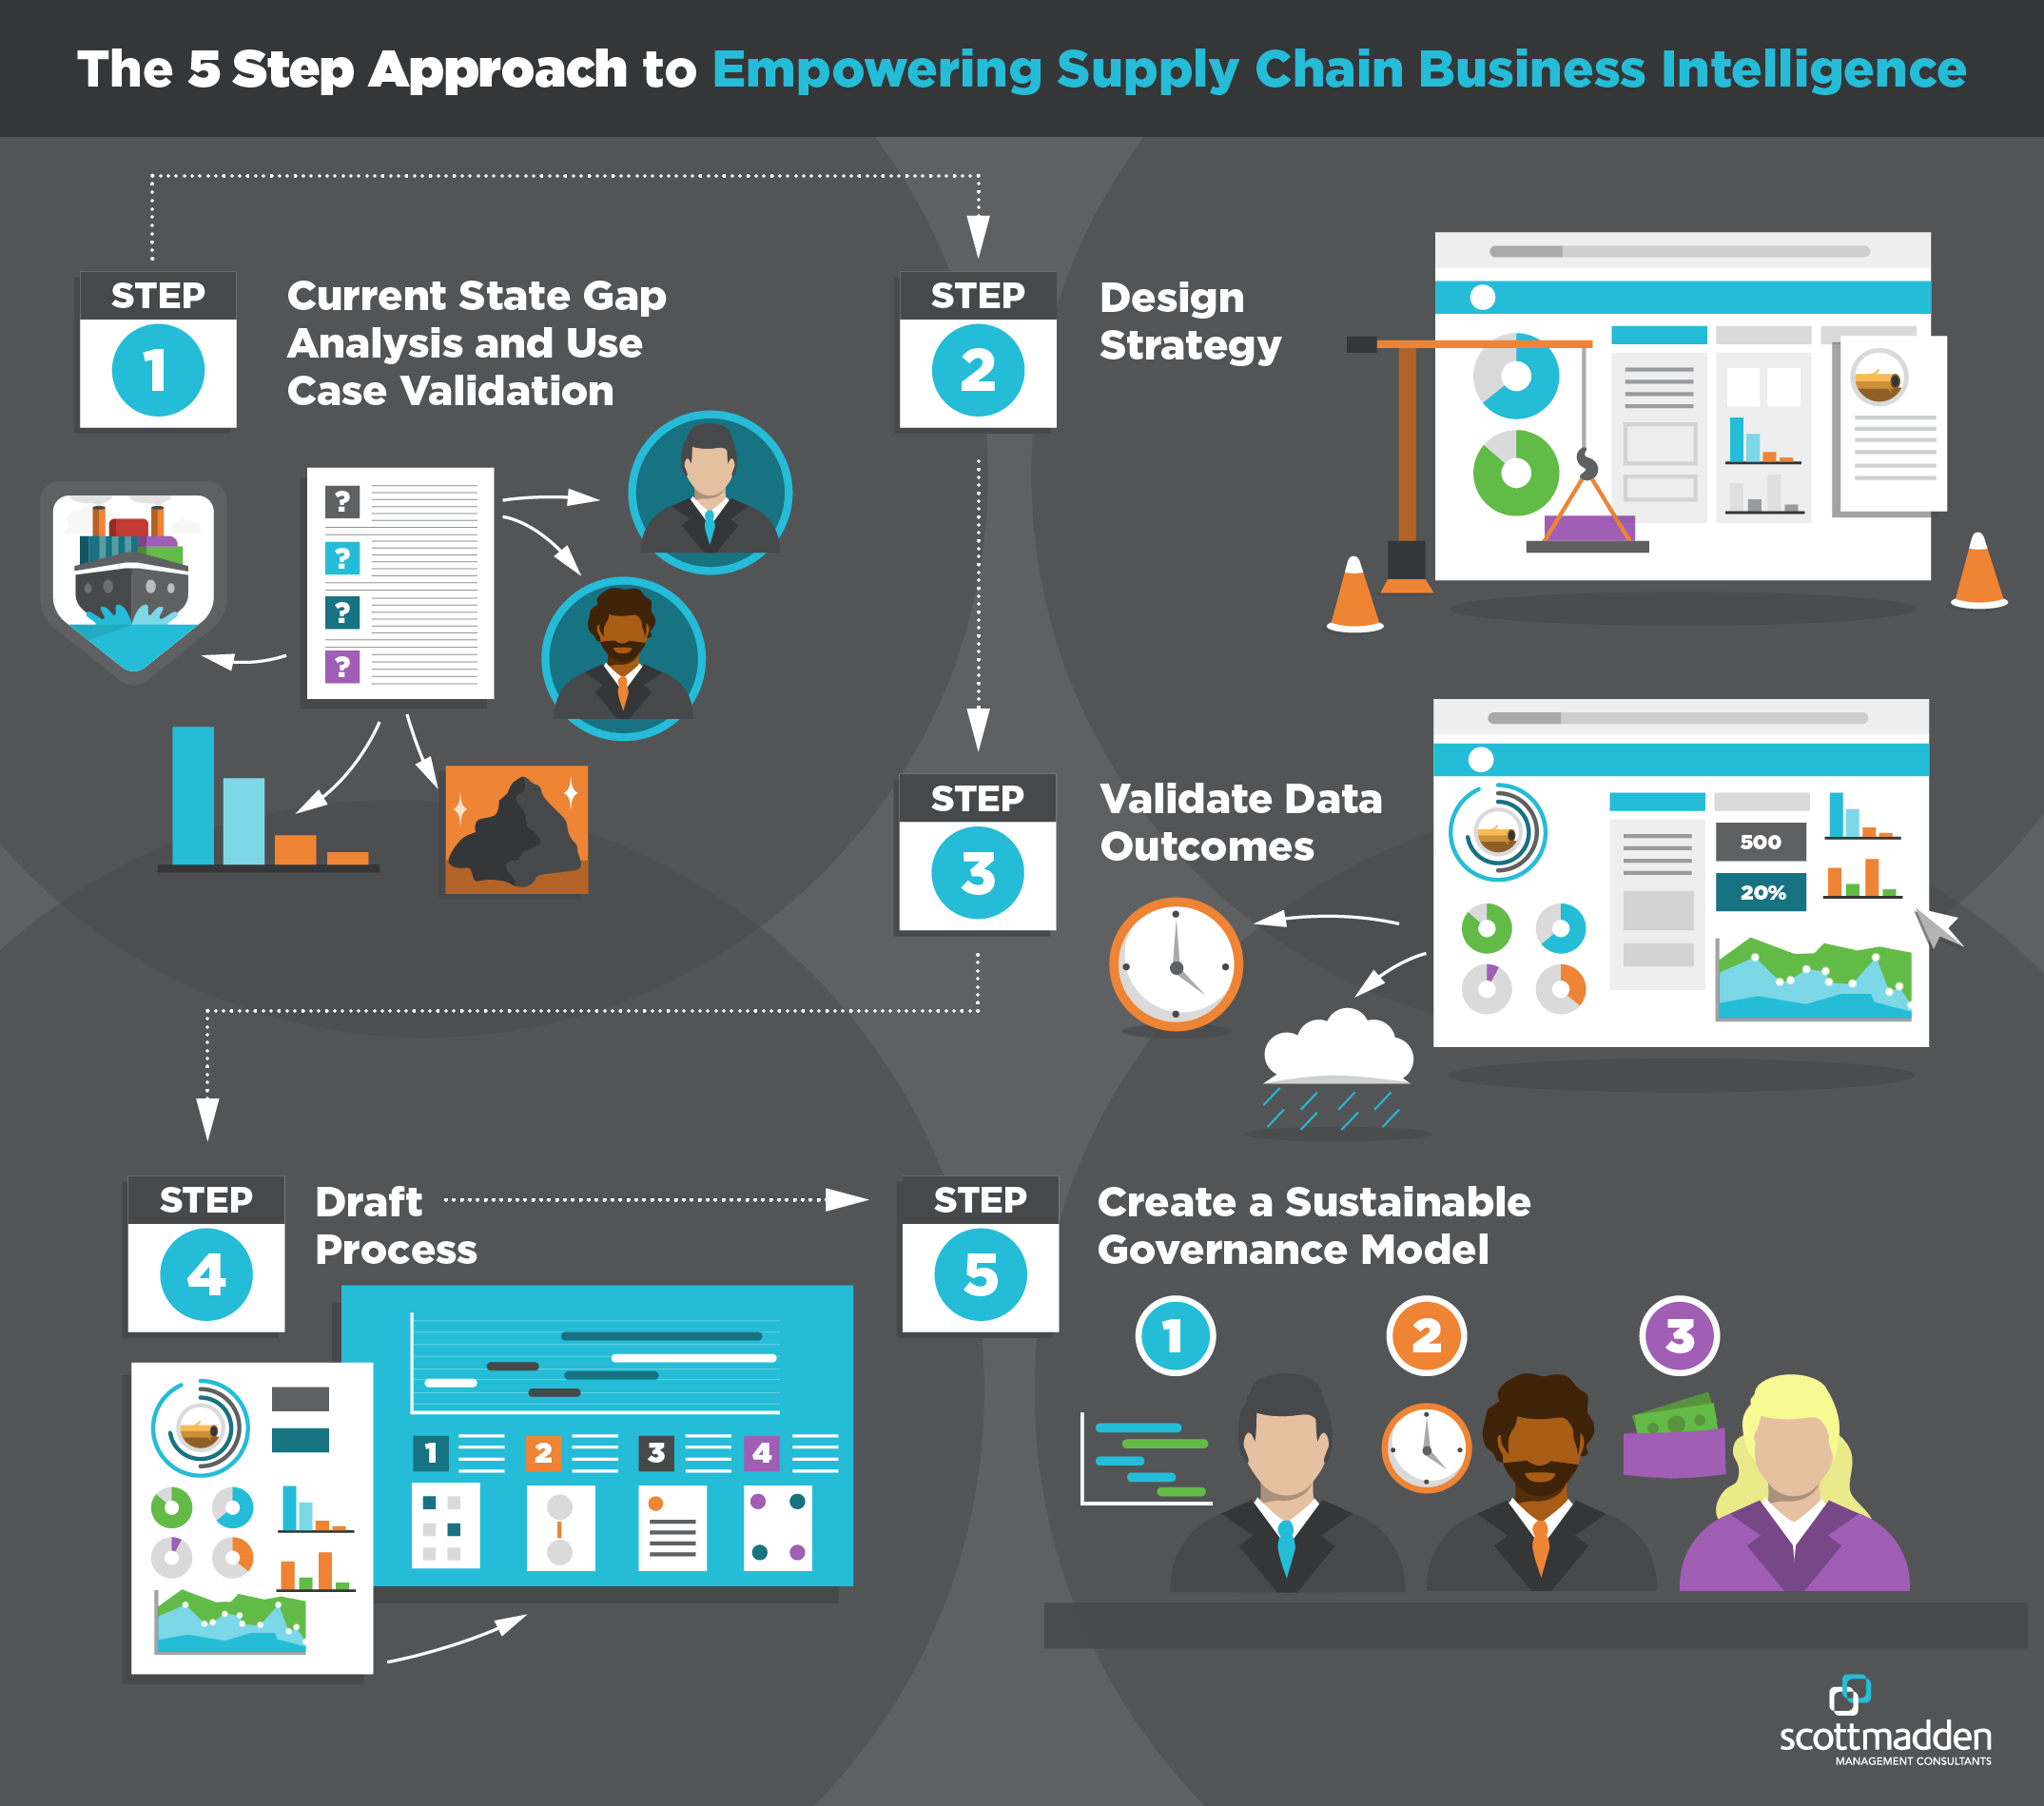 The 5 Step Approach to Empowering Supply Chain Business Intelligence